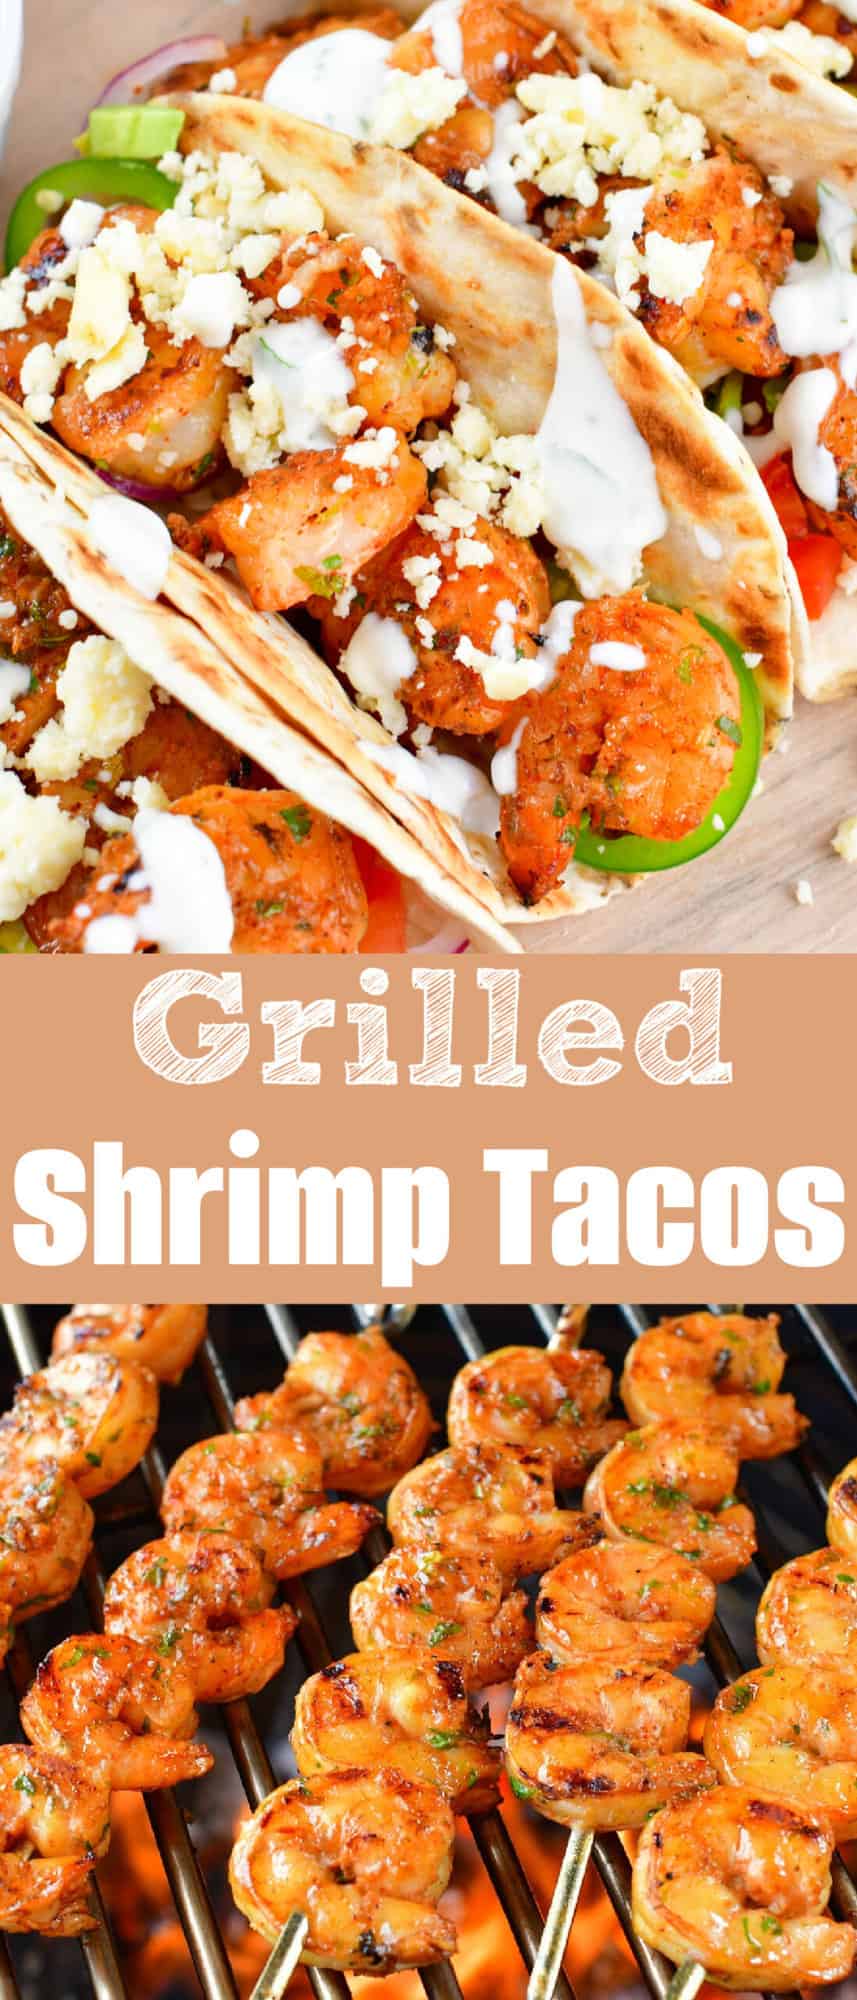 collage of two images of grilled tacos and shrimp on skewers